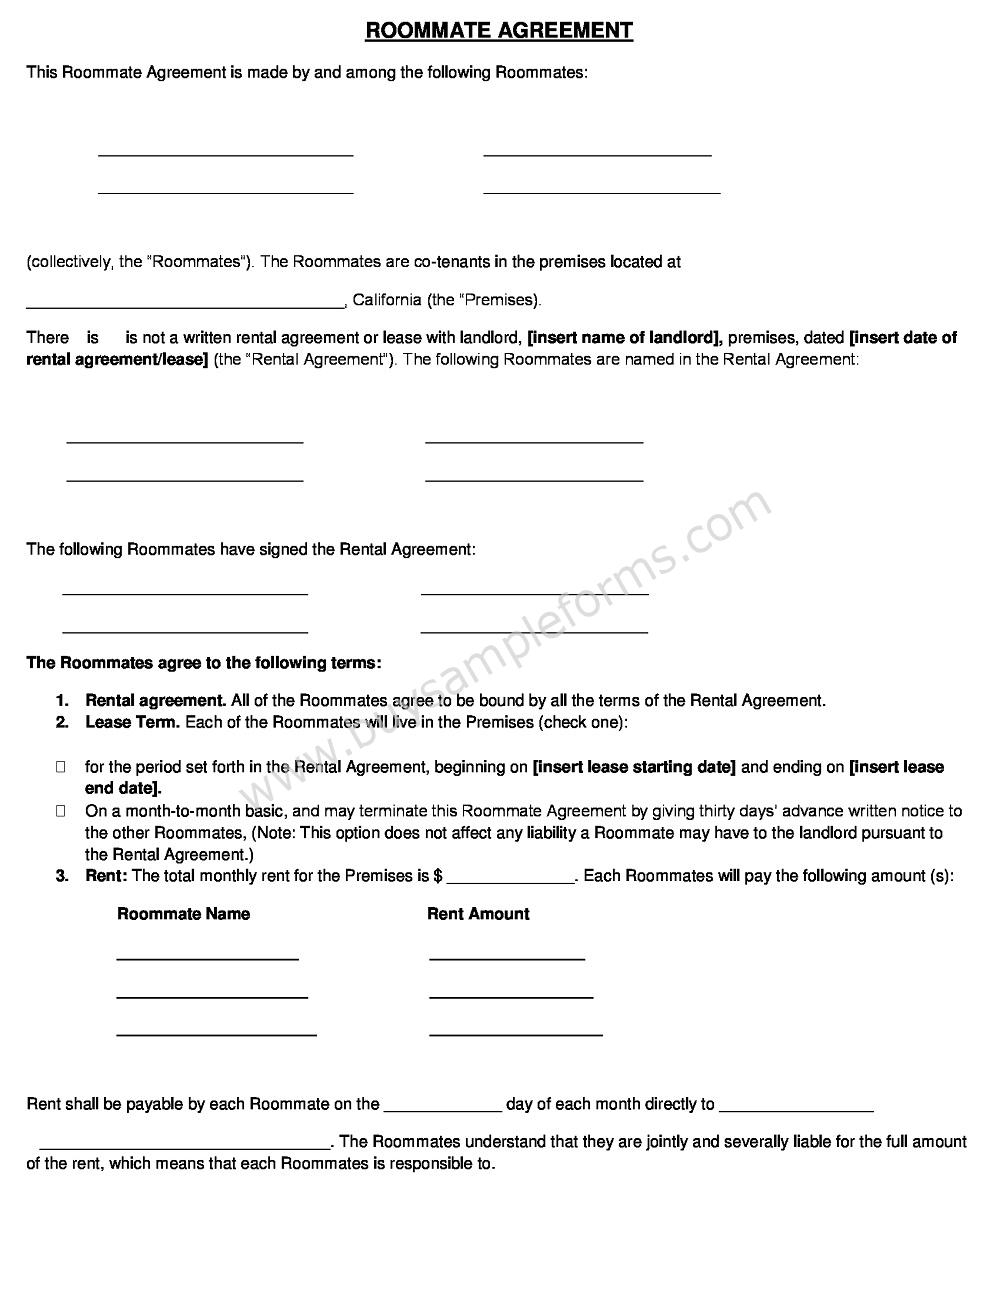 Lease Roommate Agreement Roommate Rental Agreement Form Template Word Doc Sample Forms